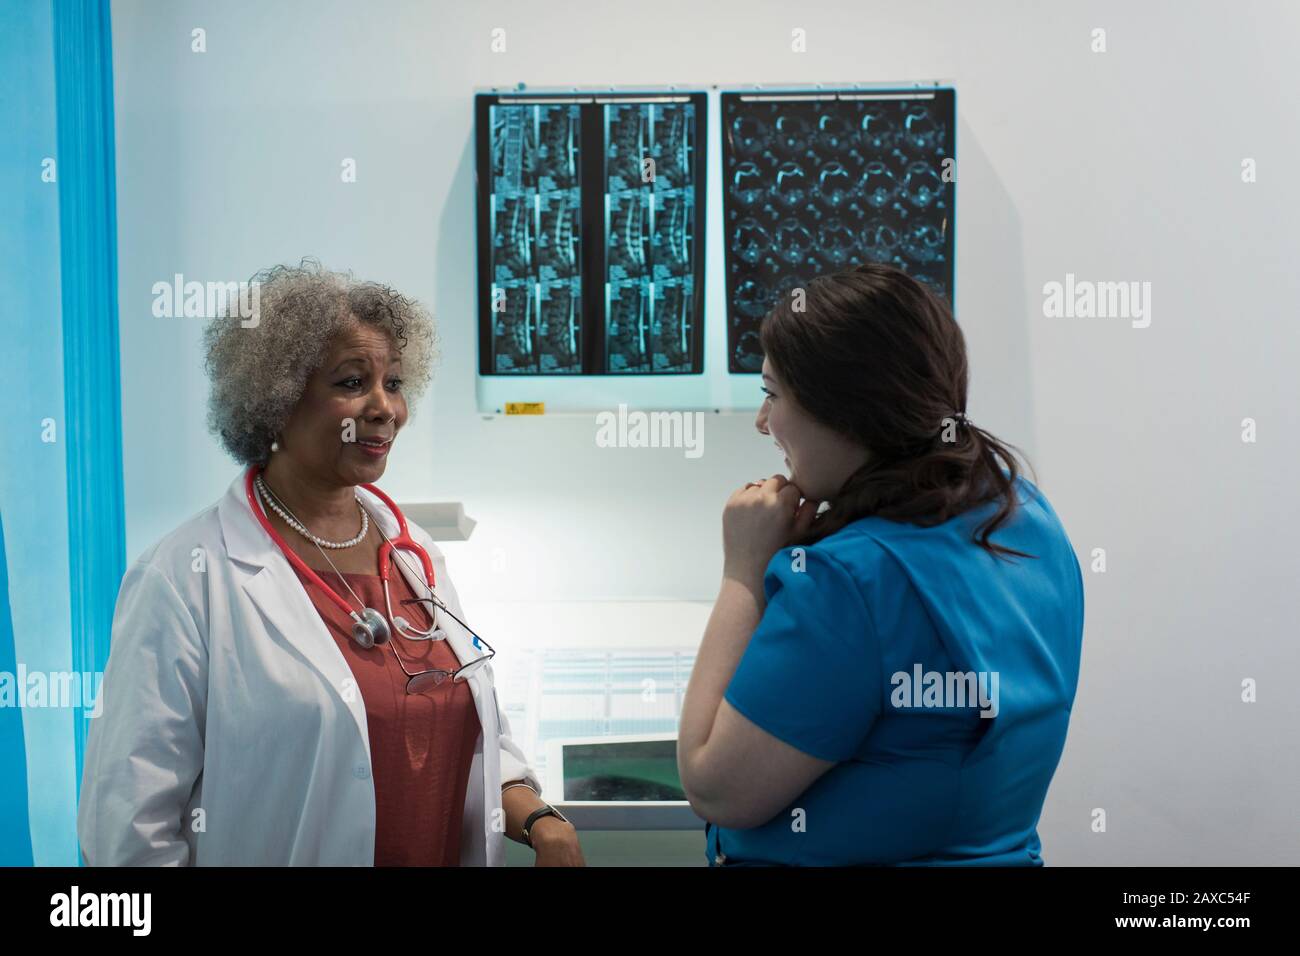 Female doctor and nurse discussing x-rays in in hospital Stock Photo